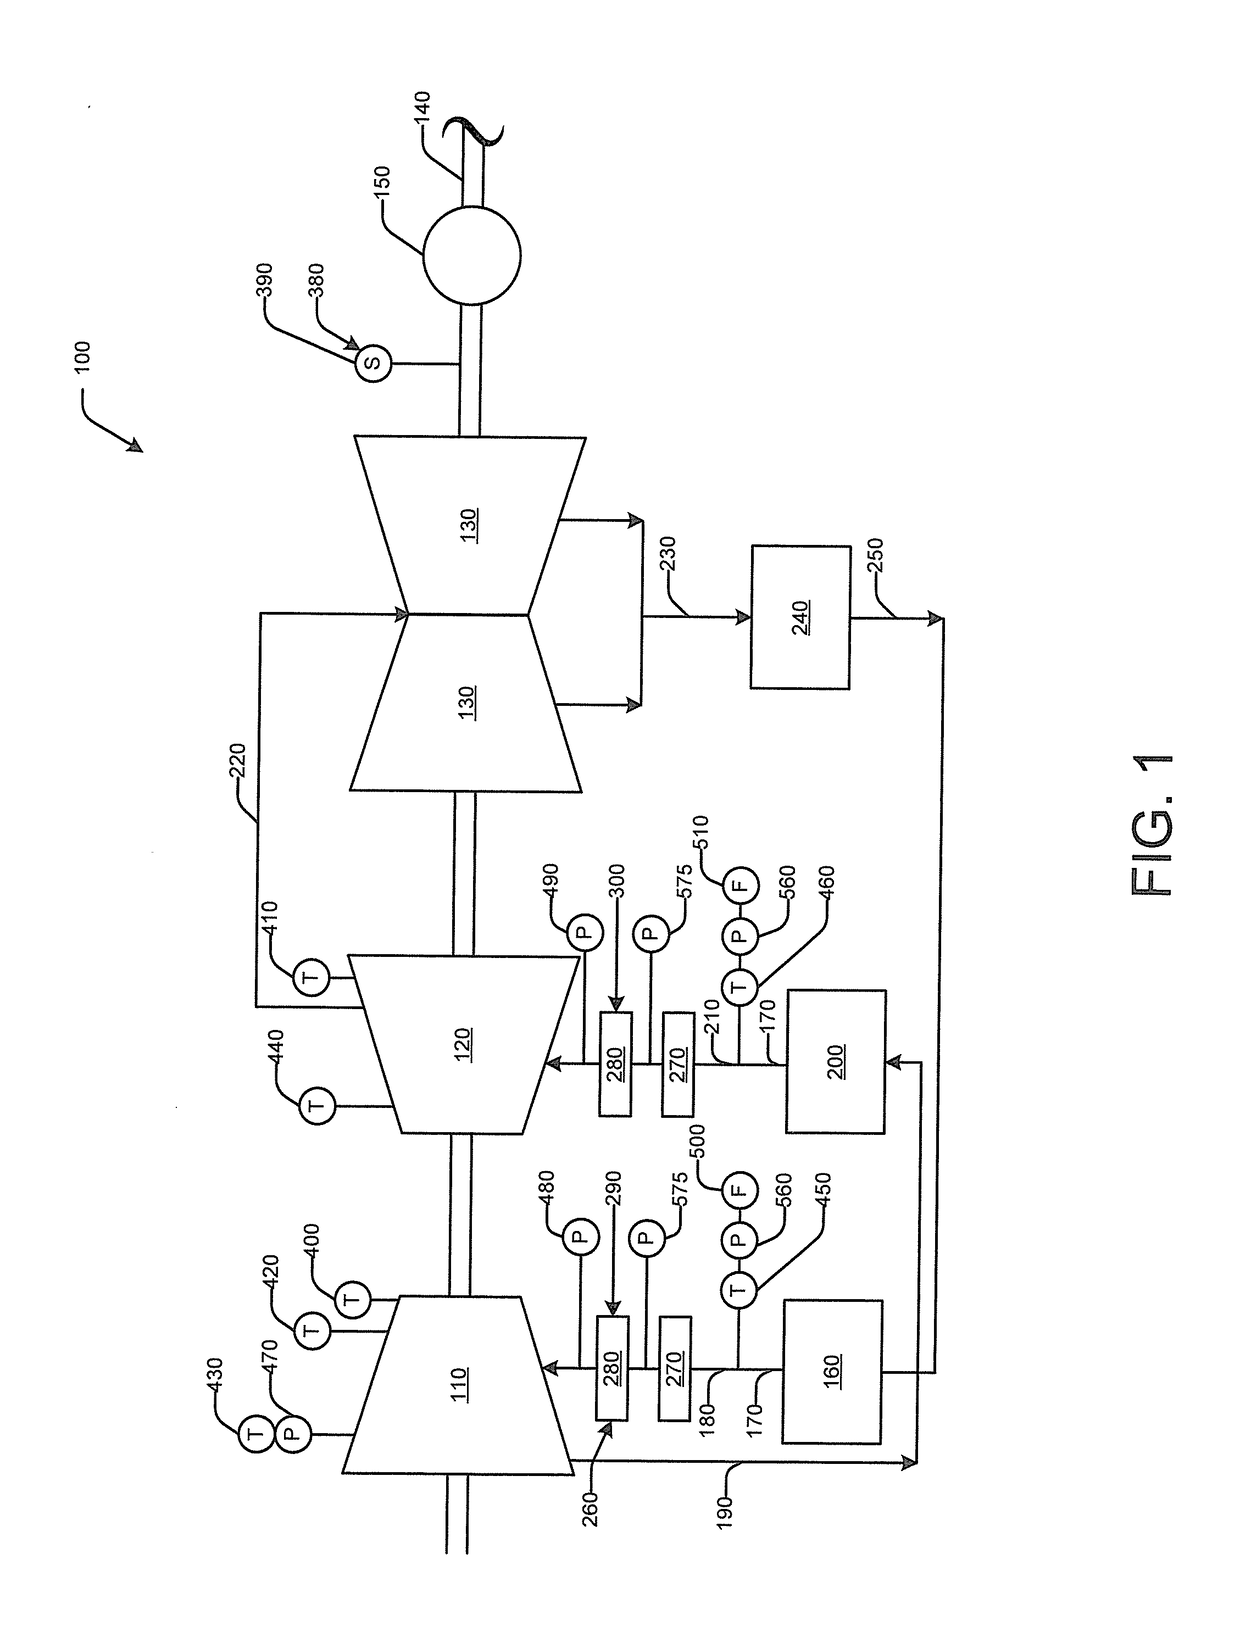 Valve Stroke And Spindle Way Counter Module For A Valve And Actuator Monitoring System